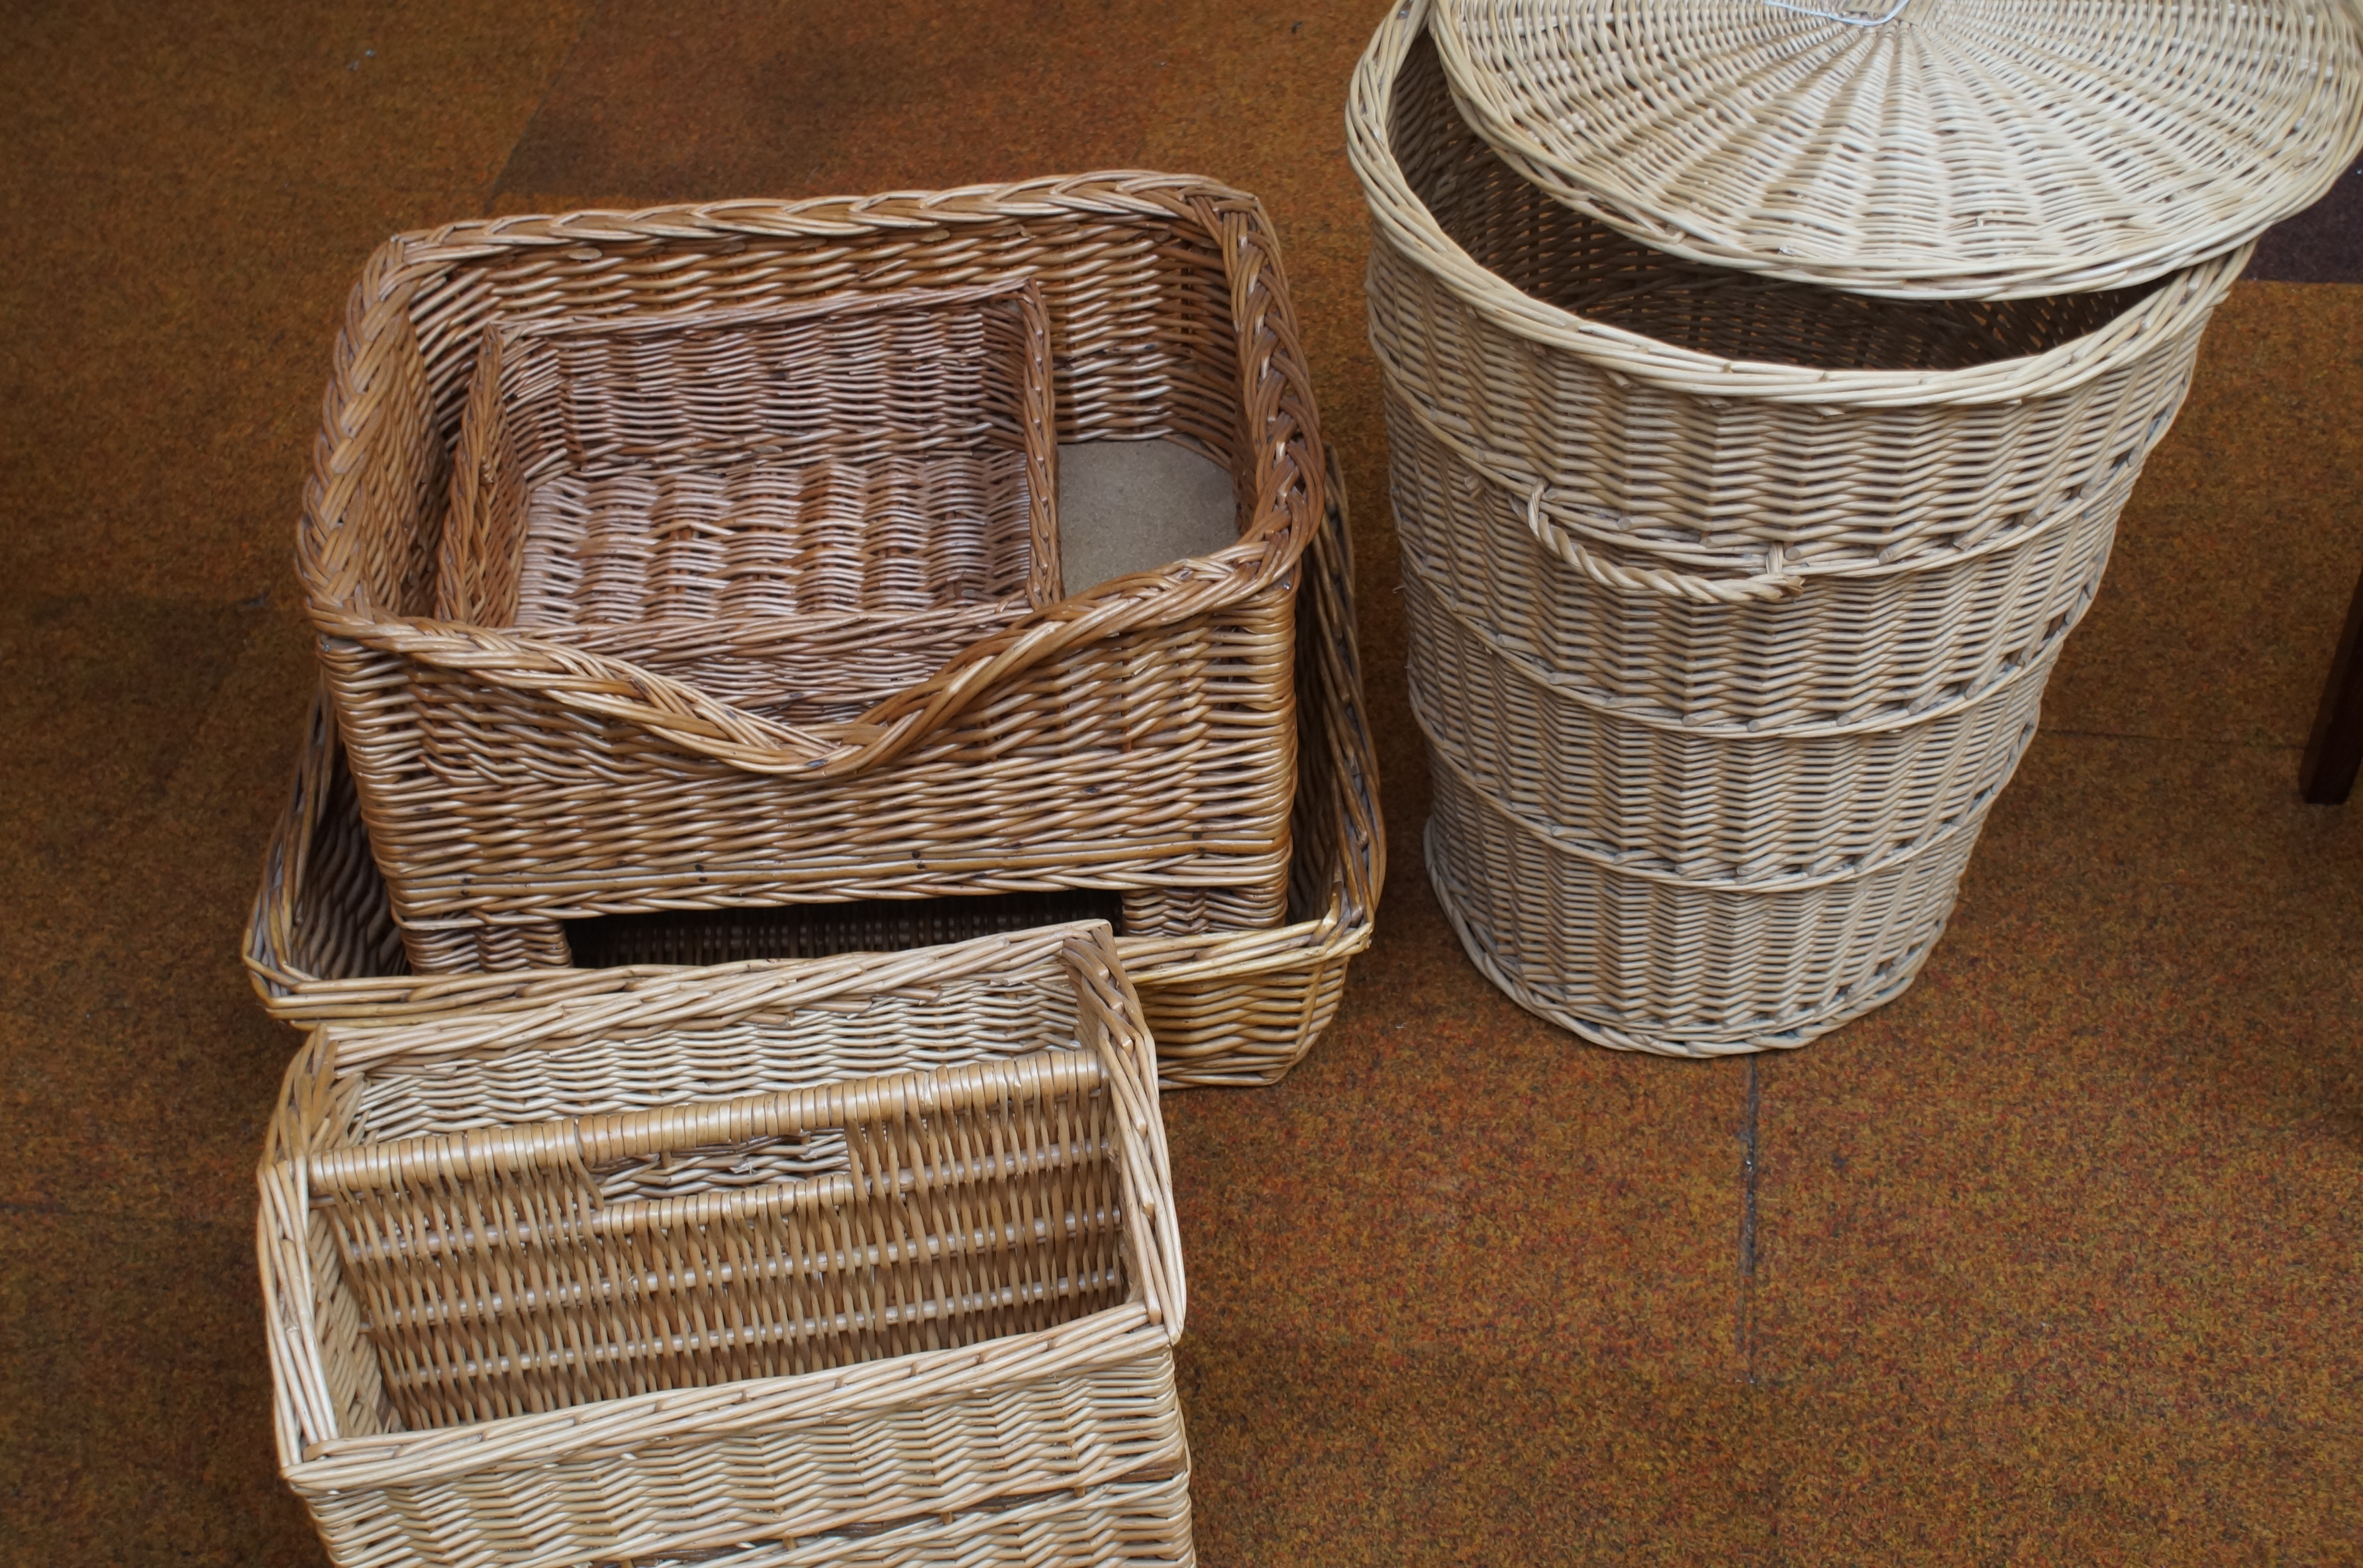 Collection of hand crafted baskets